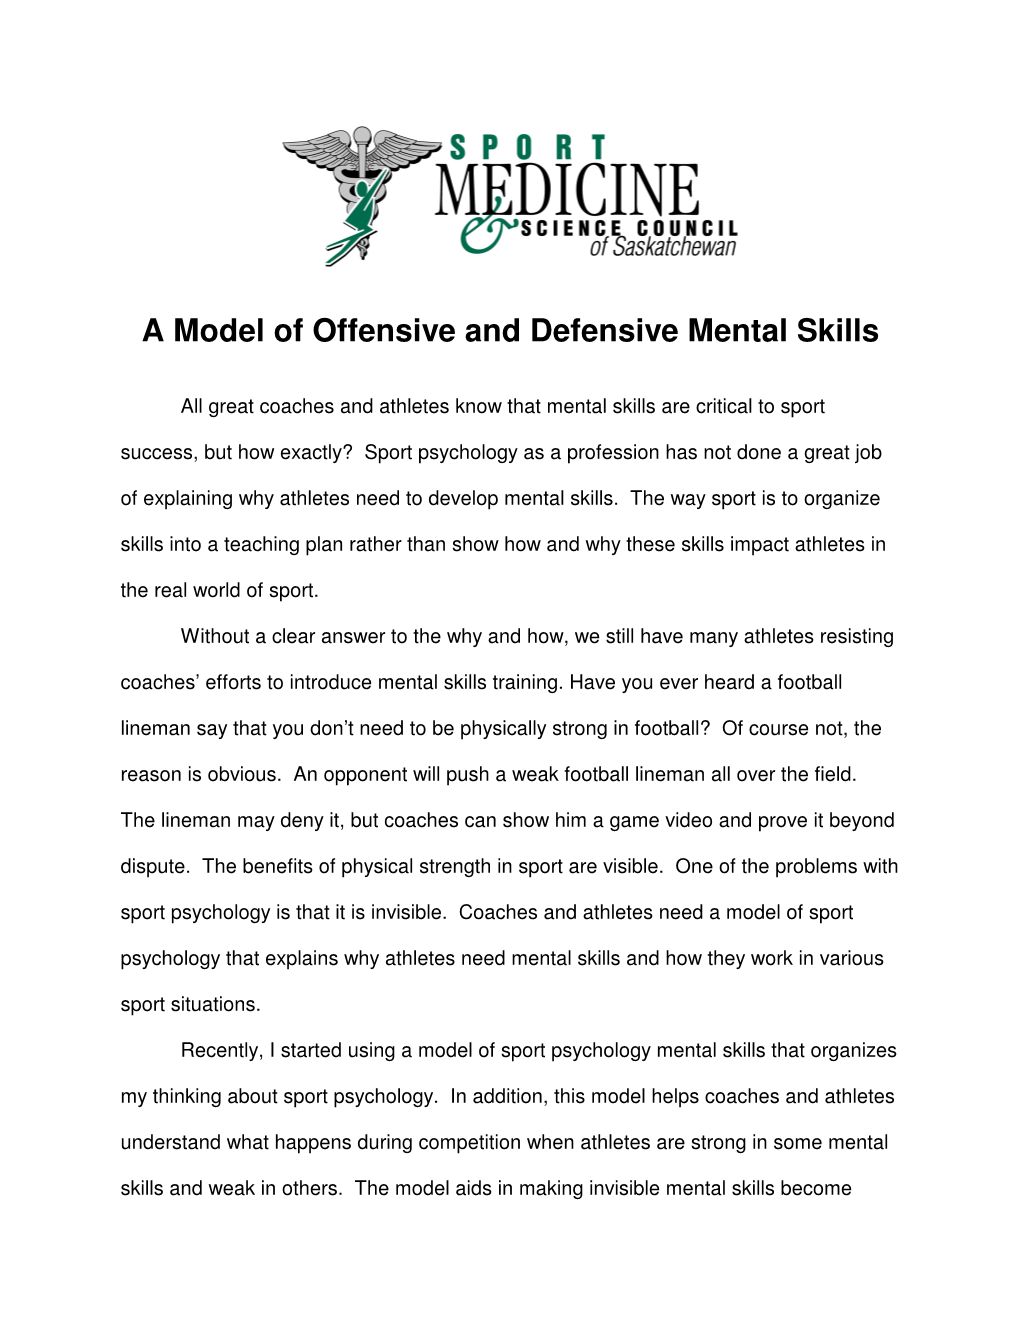 A Model of Offensive and Defensive Mental Skills